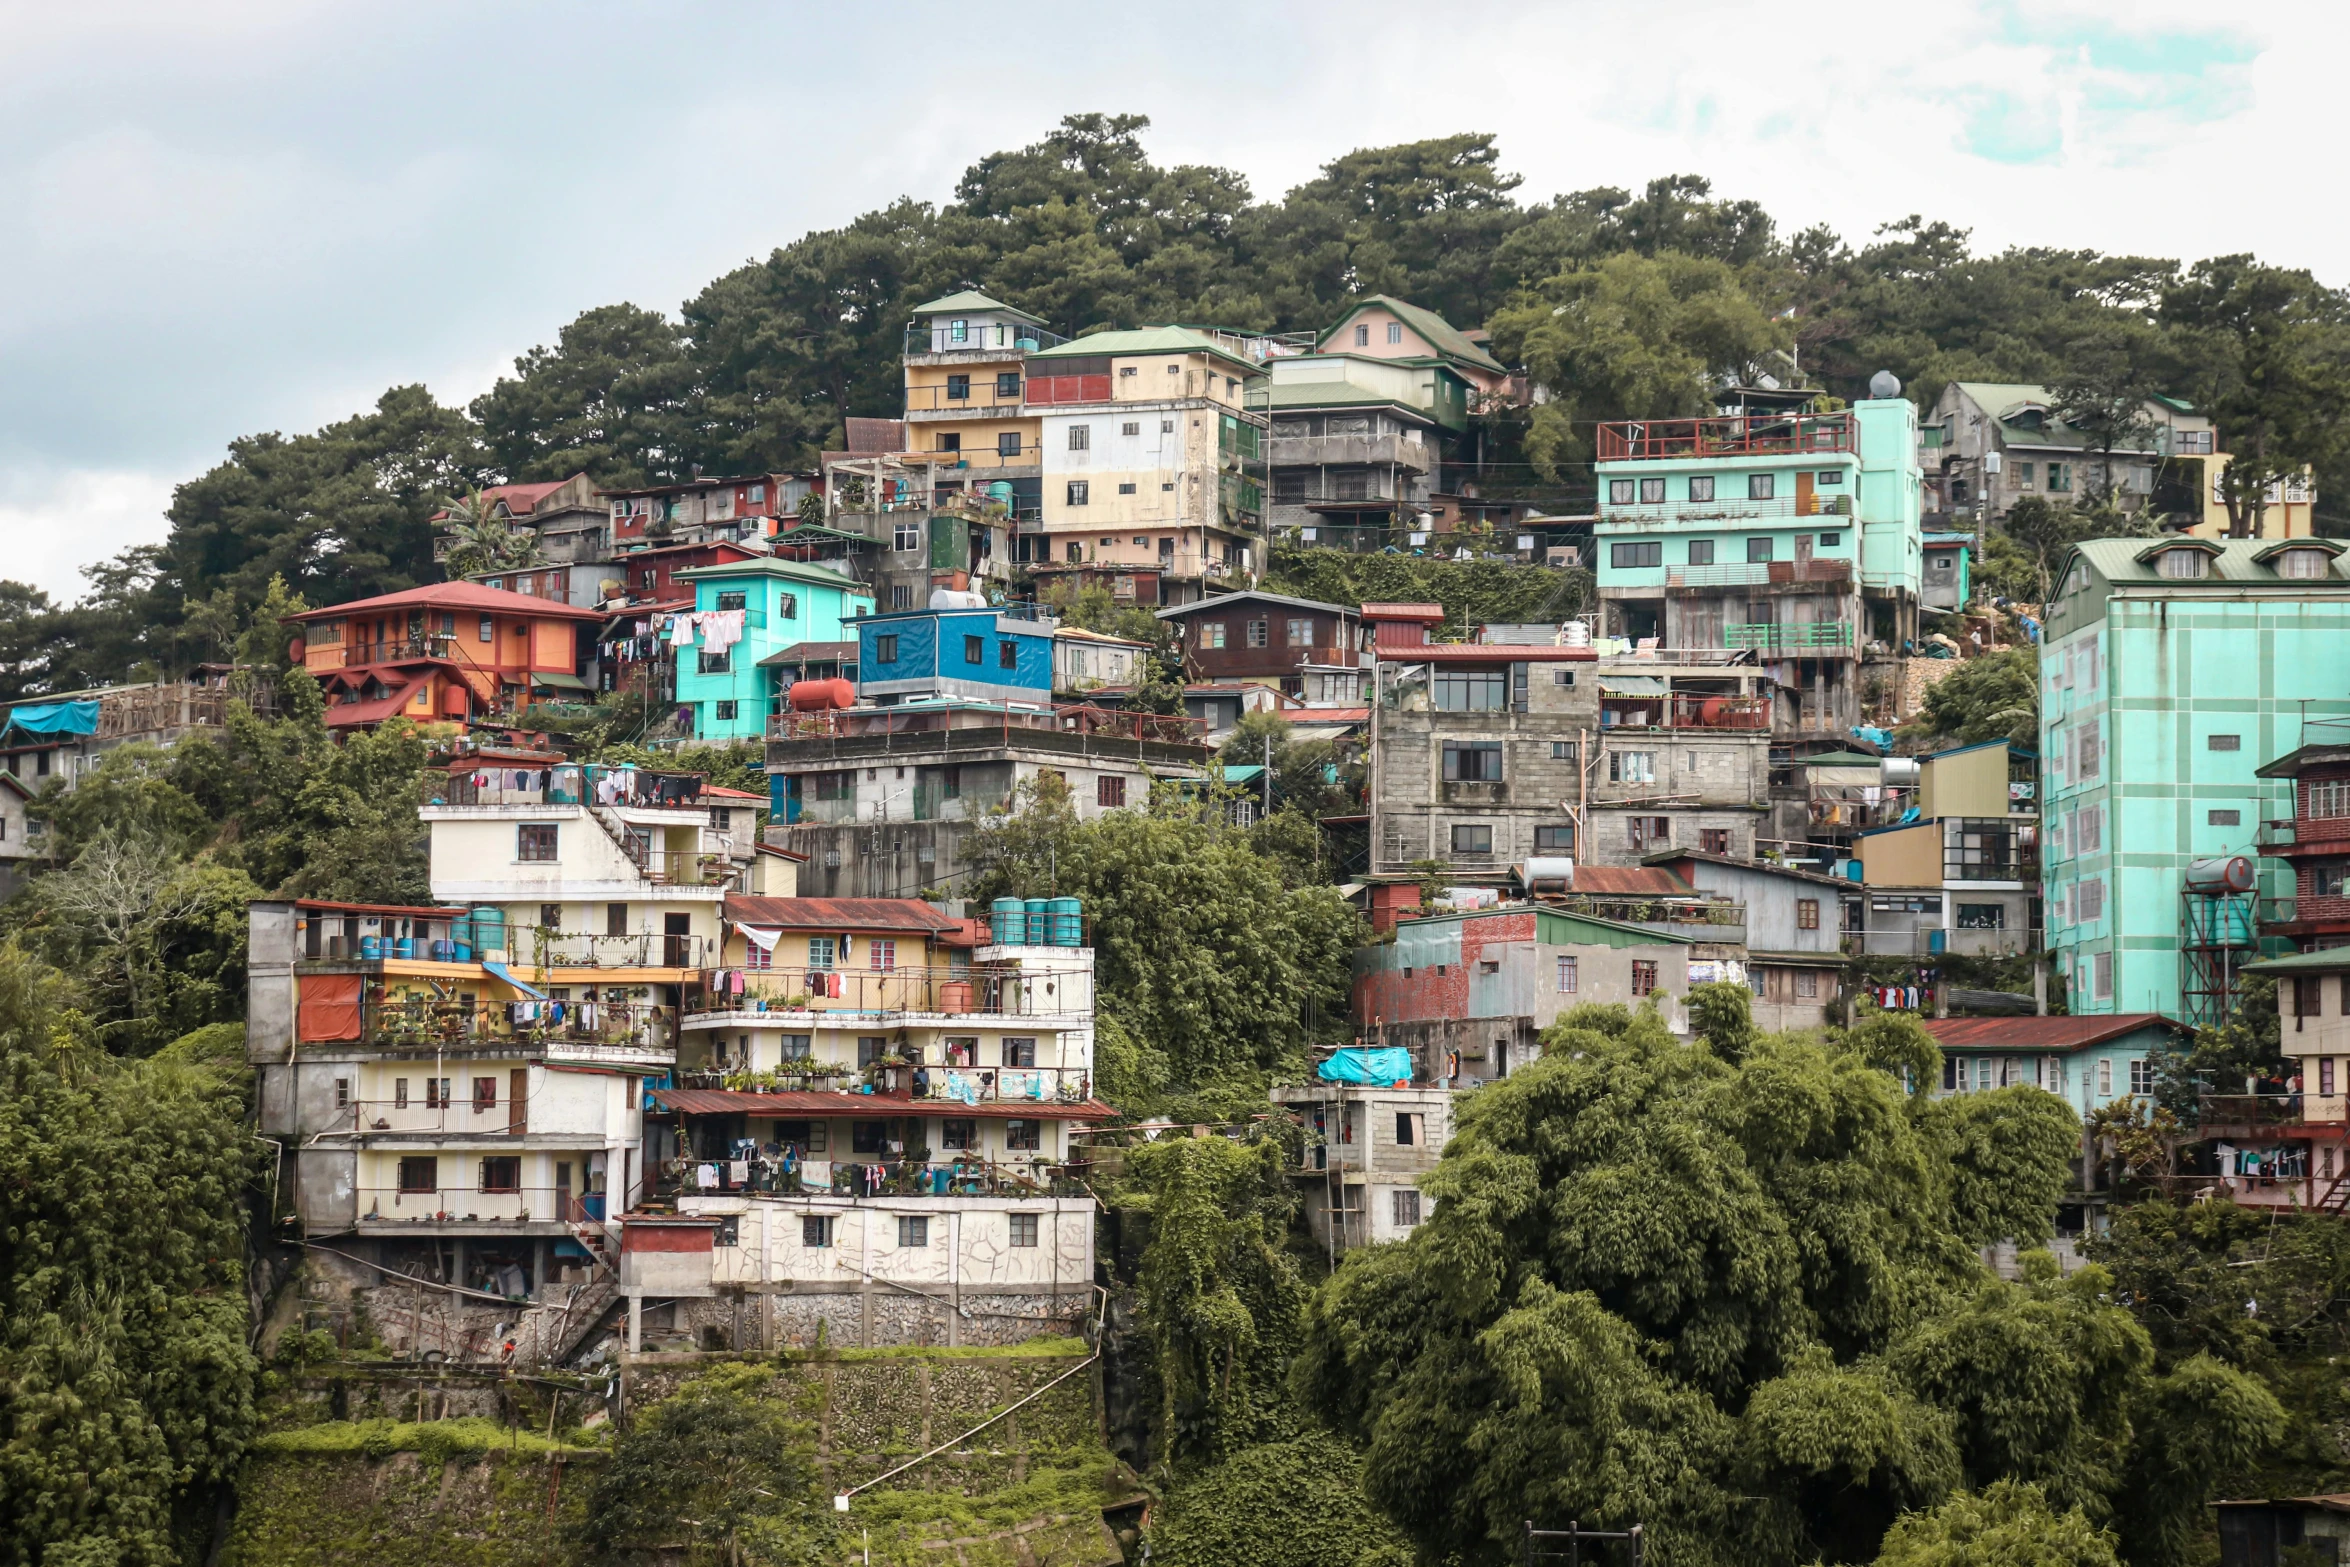 a colorful neighborhood in a city nestled on a mountain